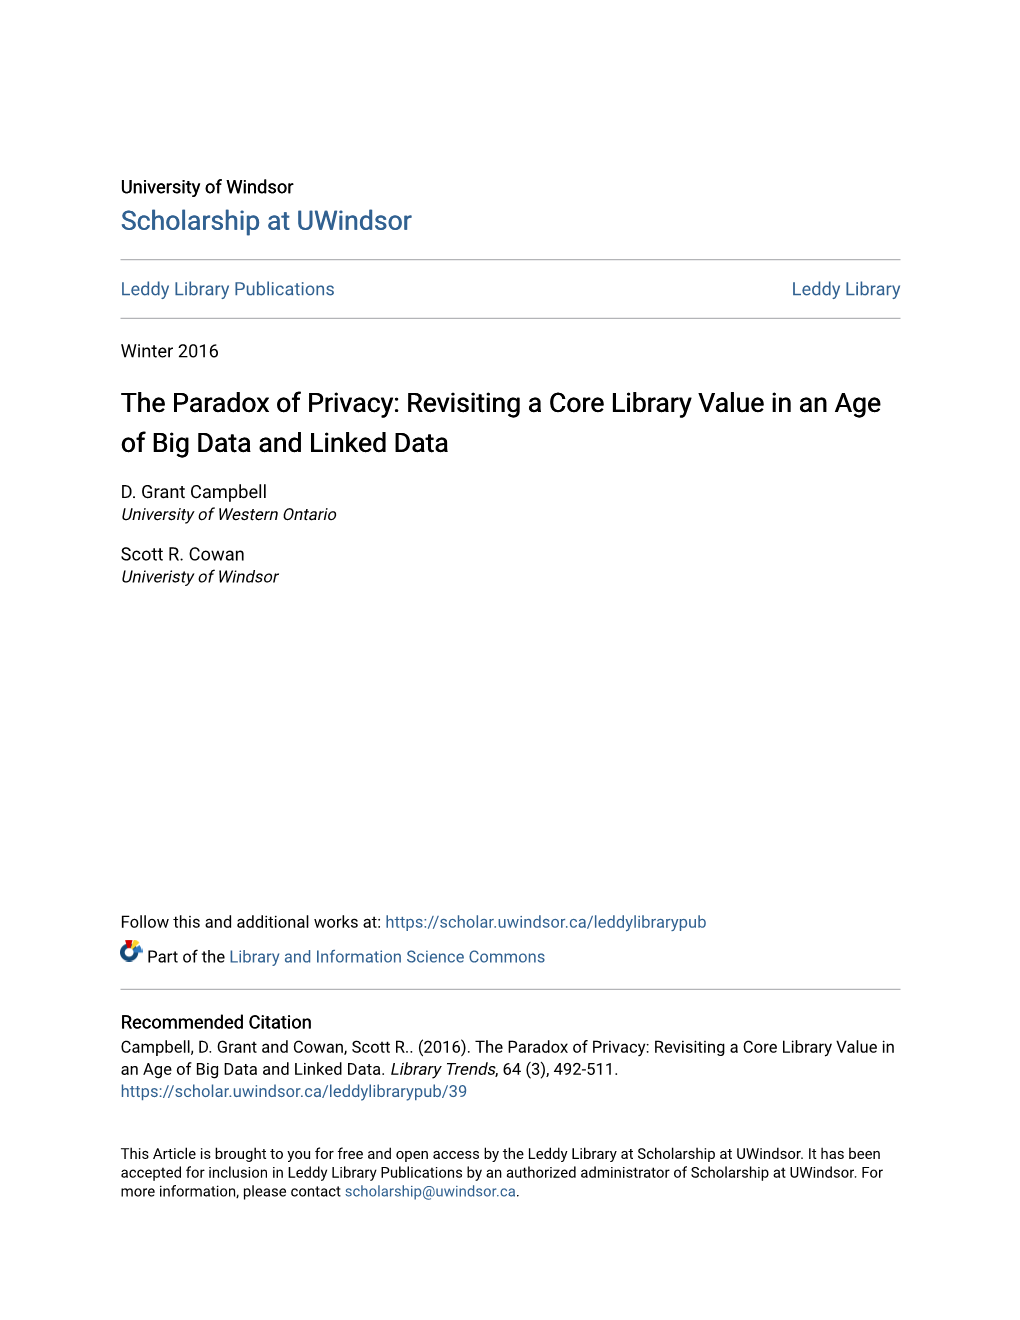 The Paradox of Privacy: Revisiting a Core Library Value in an Age of Big Data and Linked Data